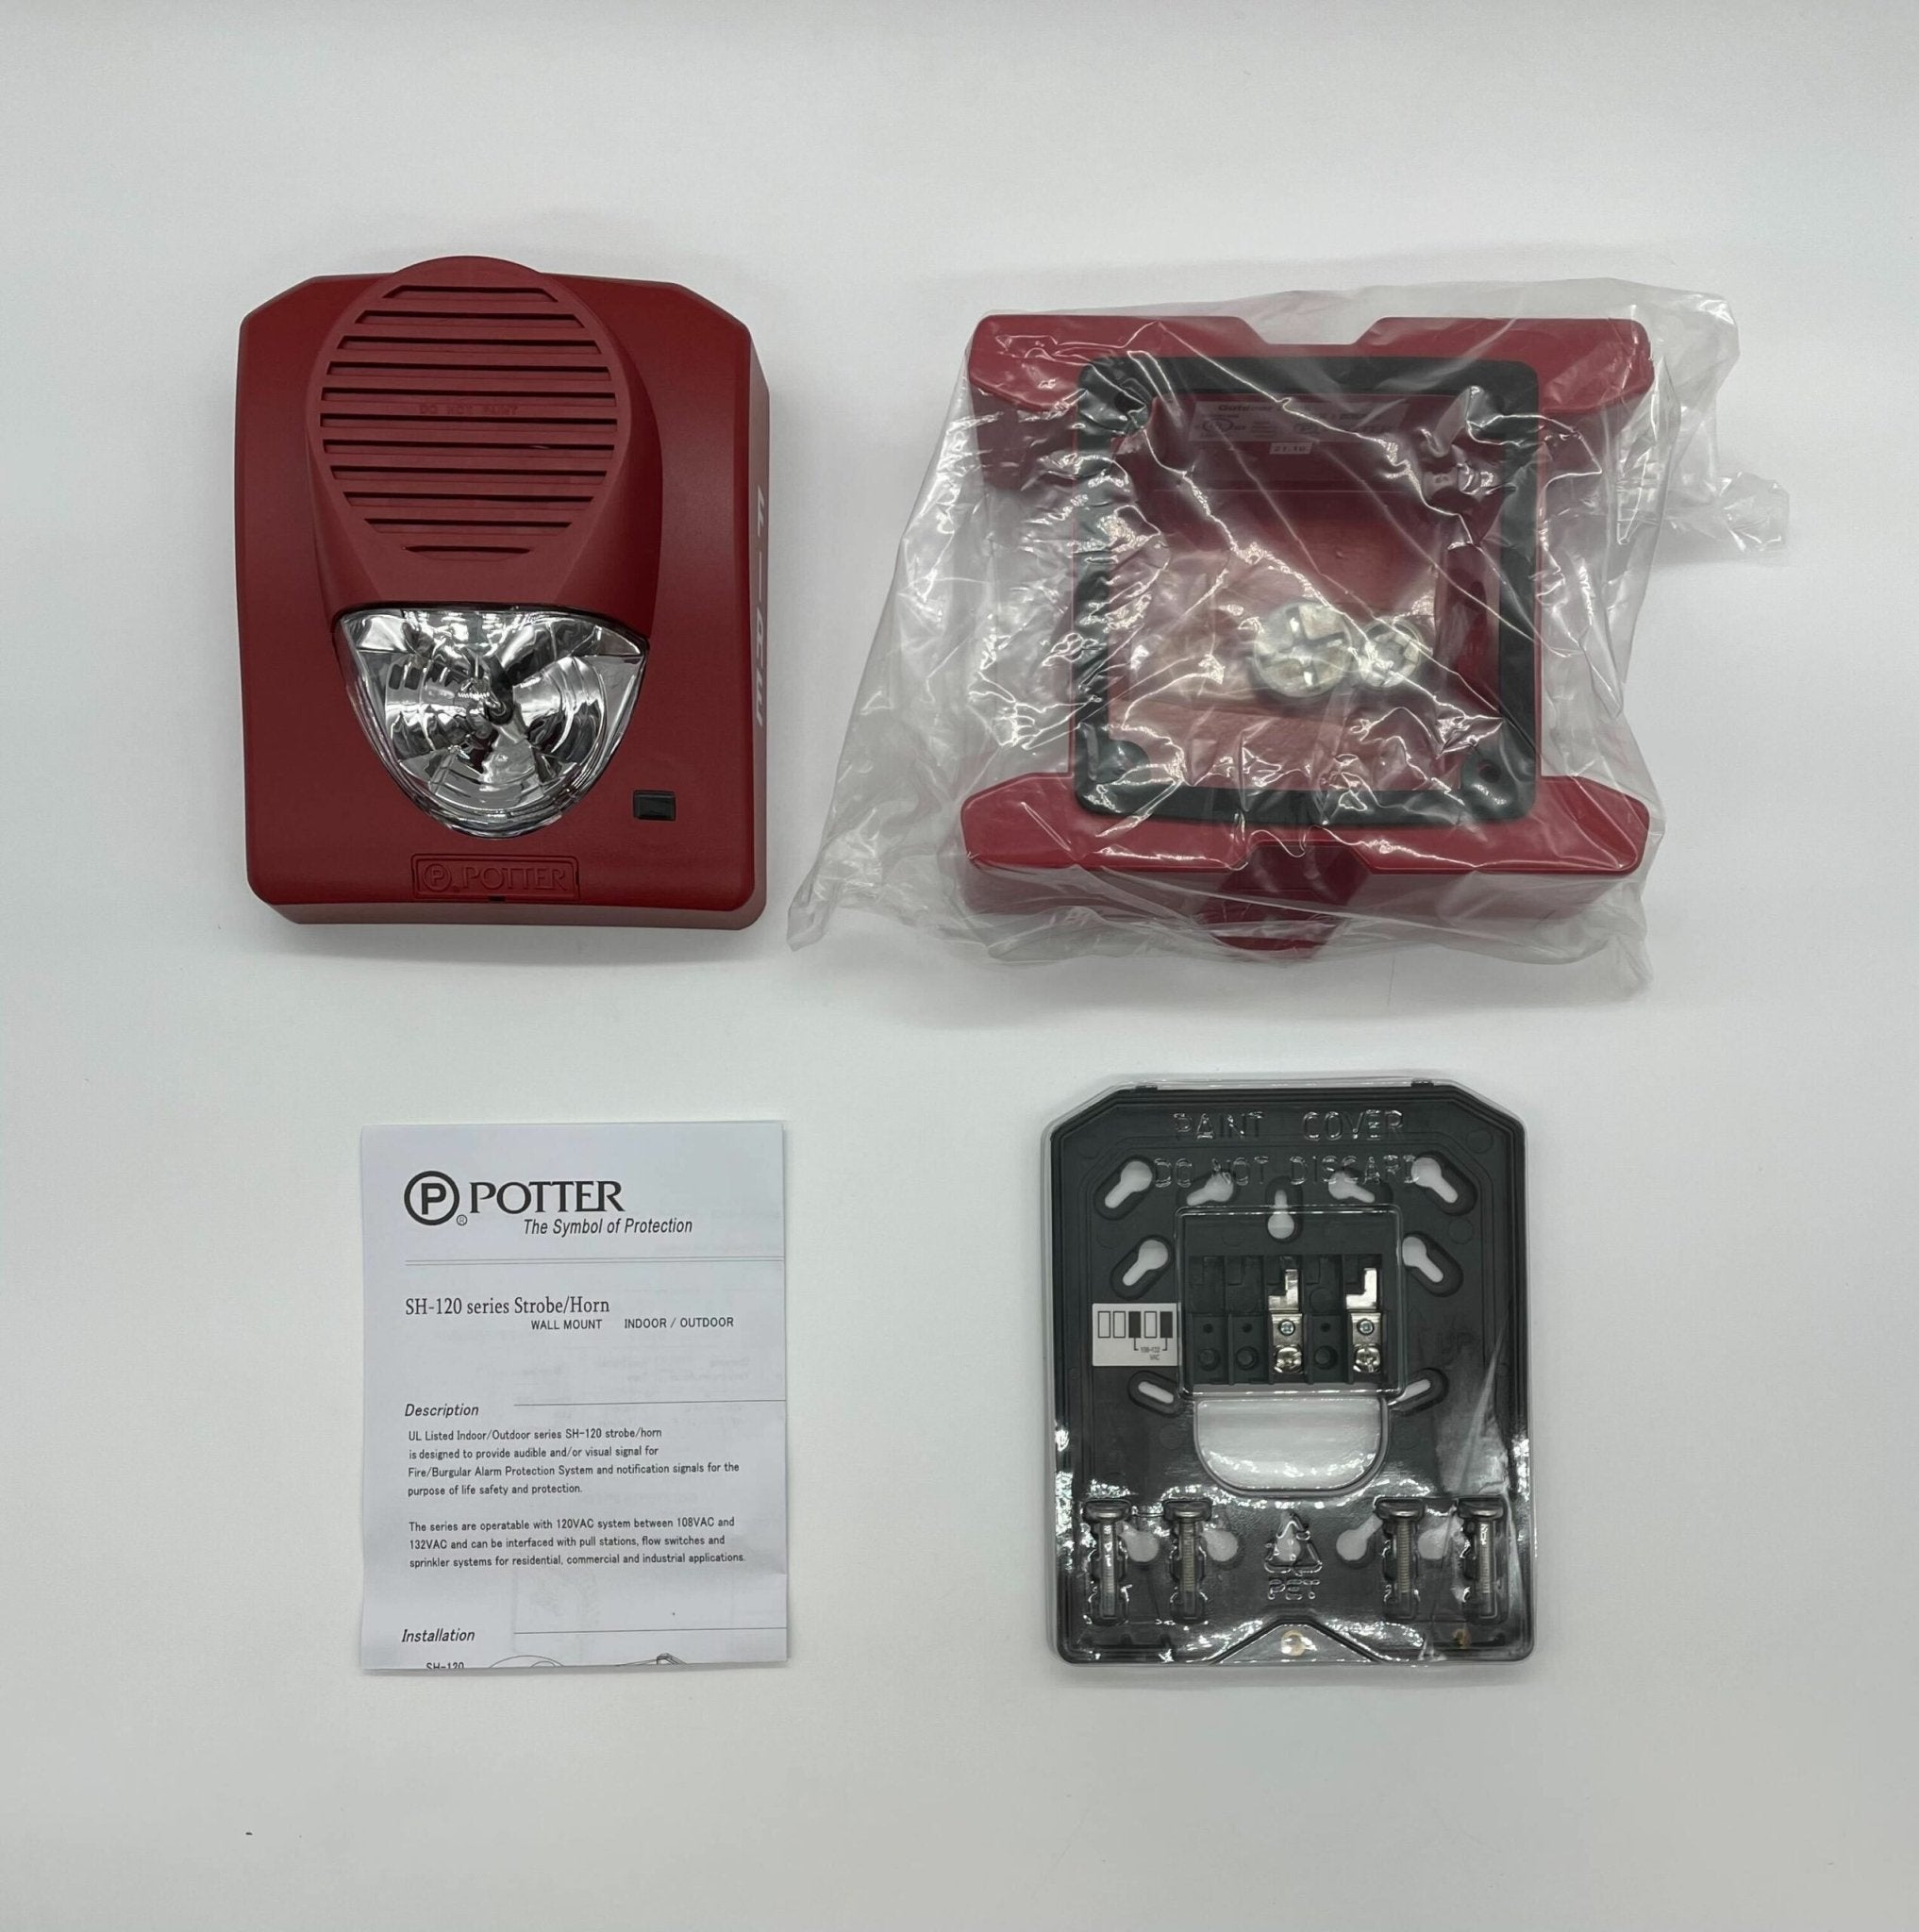 Potter SH-120R - The Fire Alarm Supplier